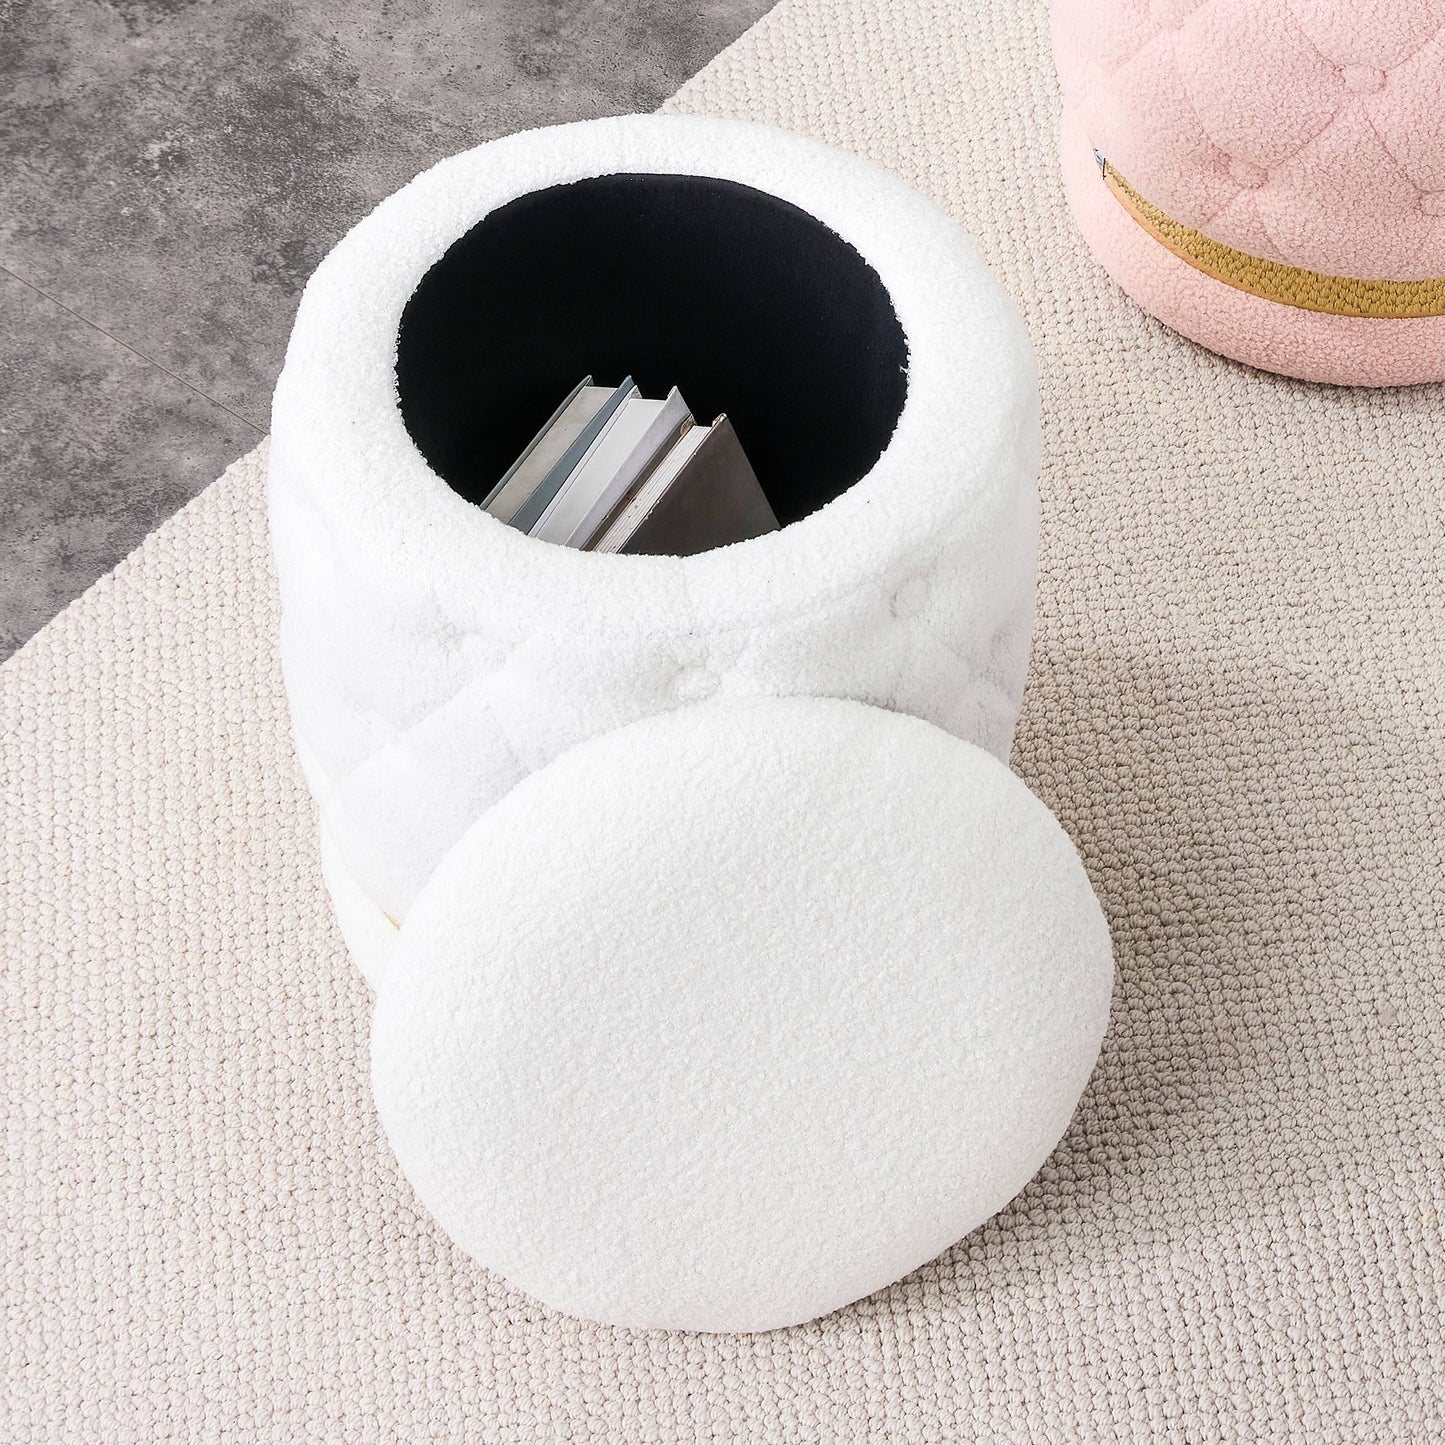 Chair White Round-shape Teddy velvet Makeup Stool Footstool, chair with storage space .Applicable to living room dresser kitchen bedroom dining room